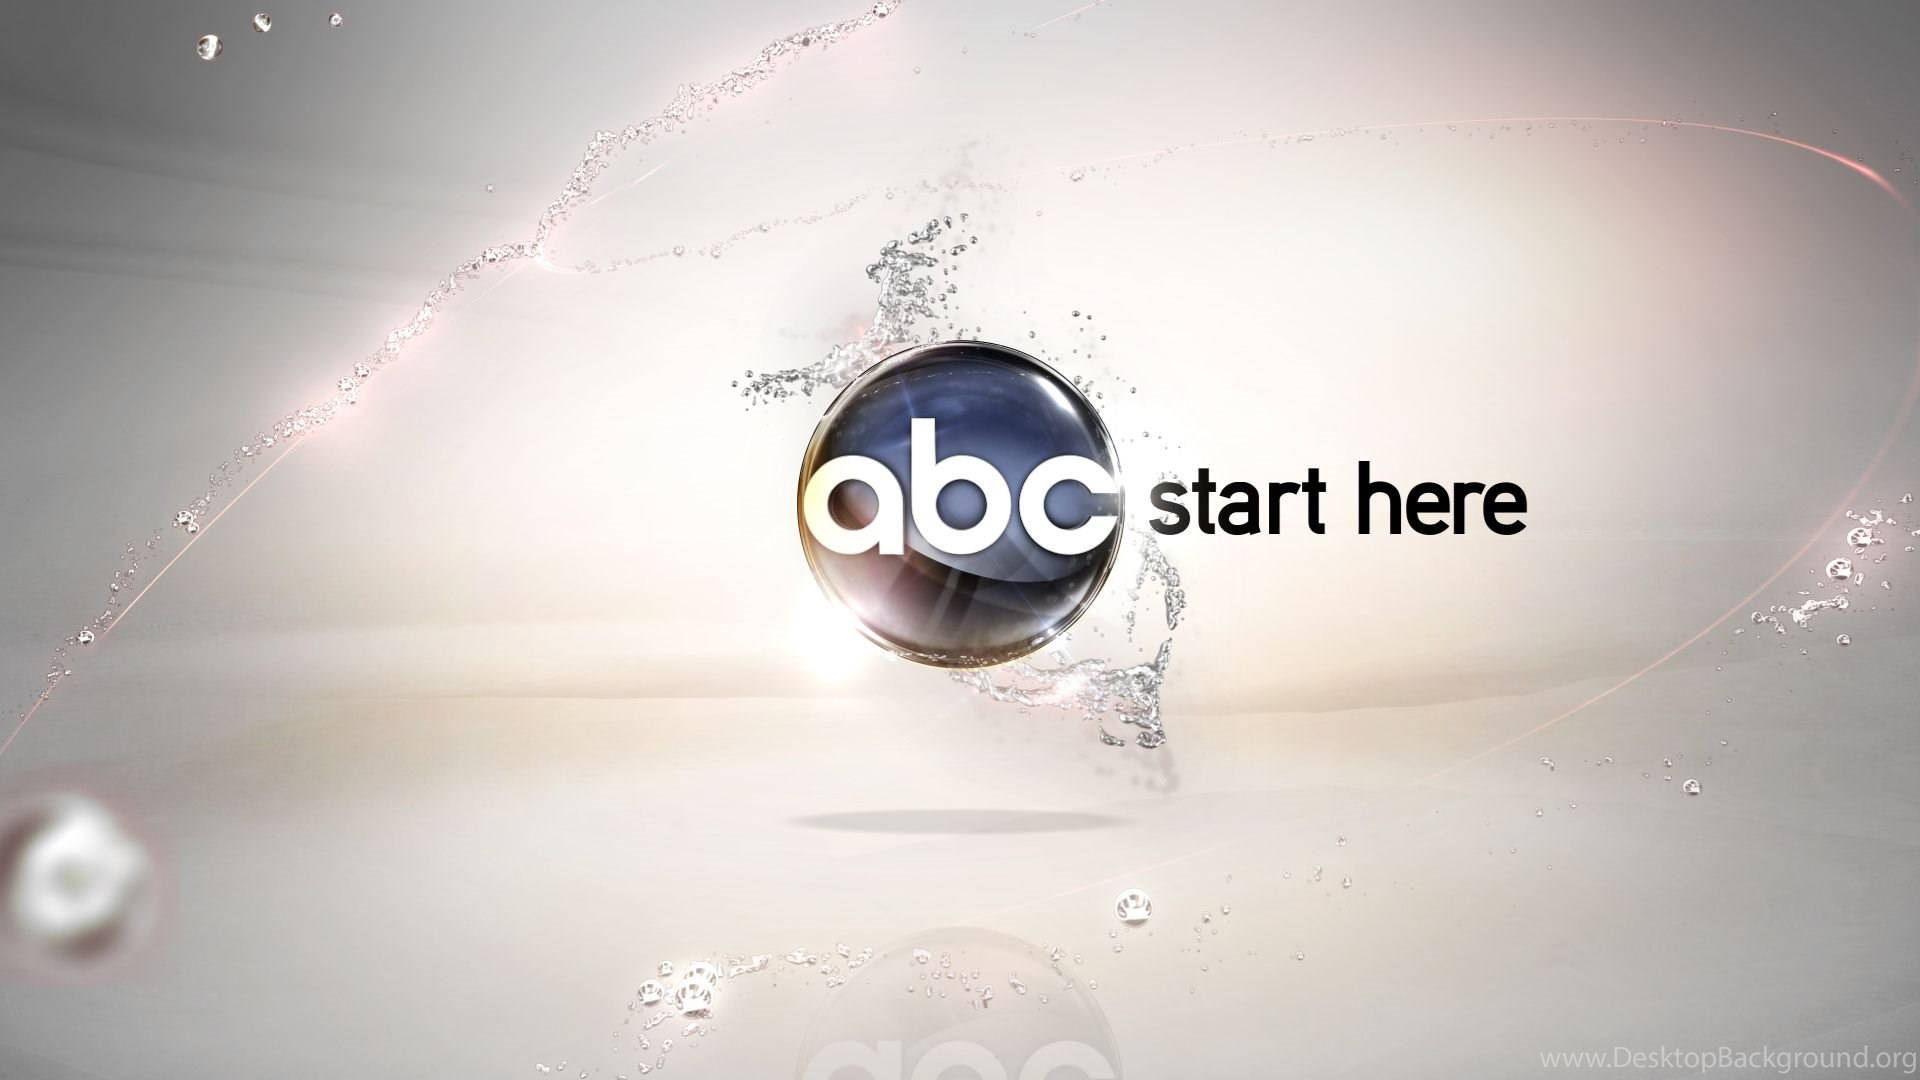 Vibrant Abc Logo Immersed In A Water Splash Effect Background